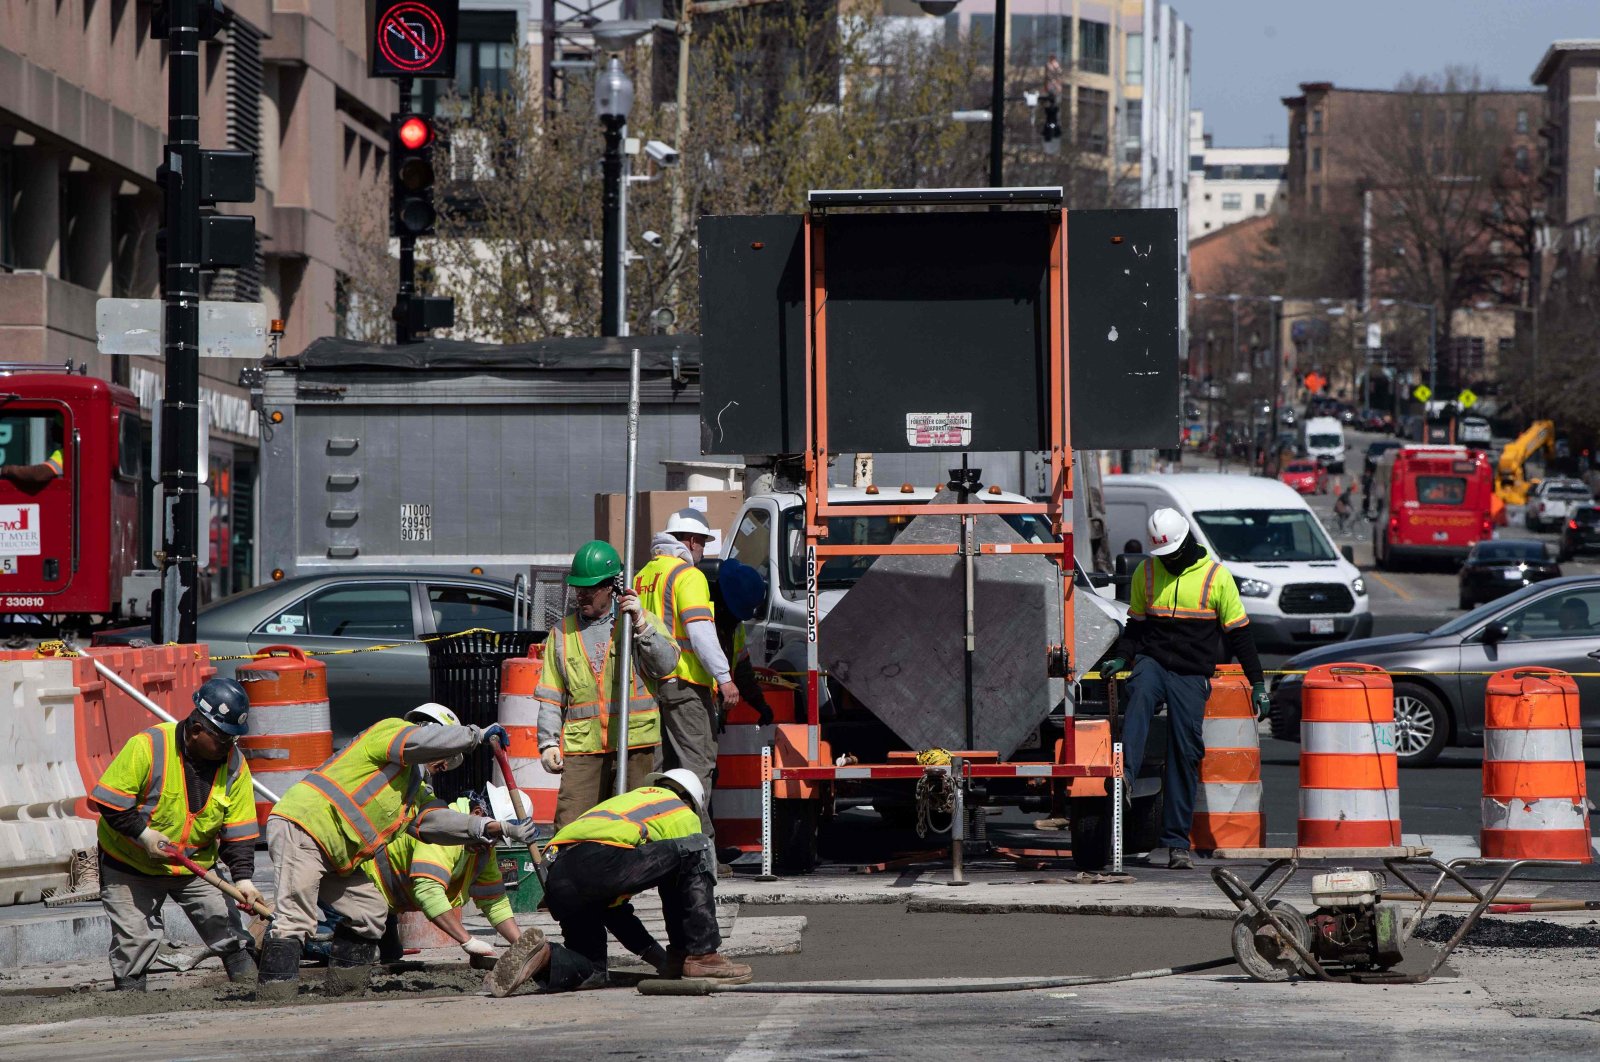 Workers repave a street in Washington, DC, on March 18, as the country deal with the novel coronavirus, COVID-19. (AFP Photo)